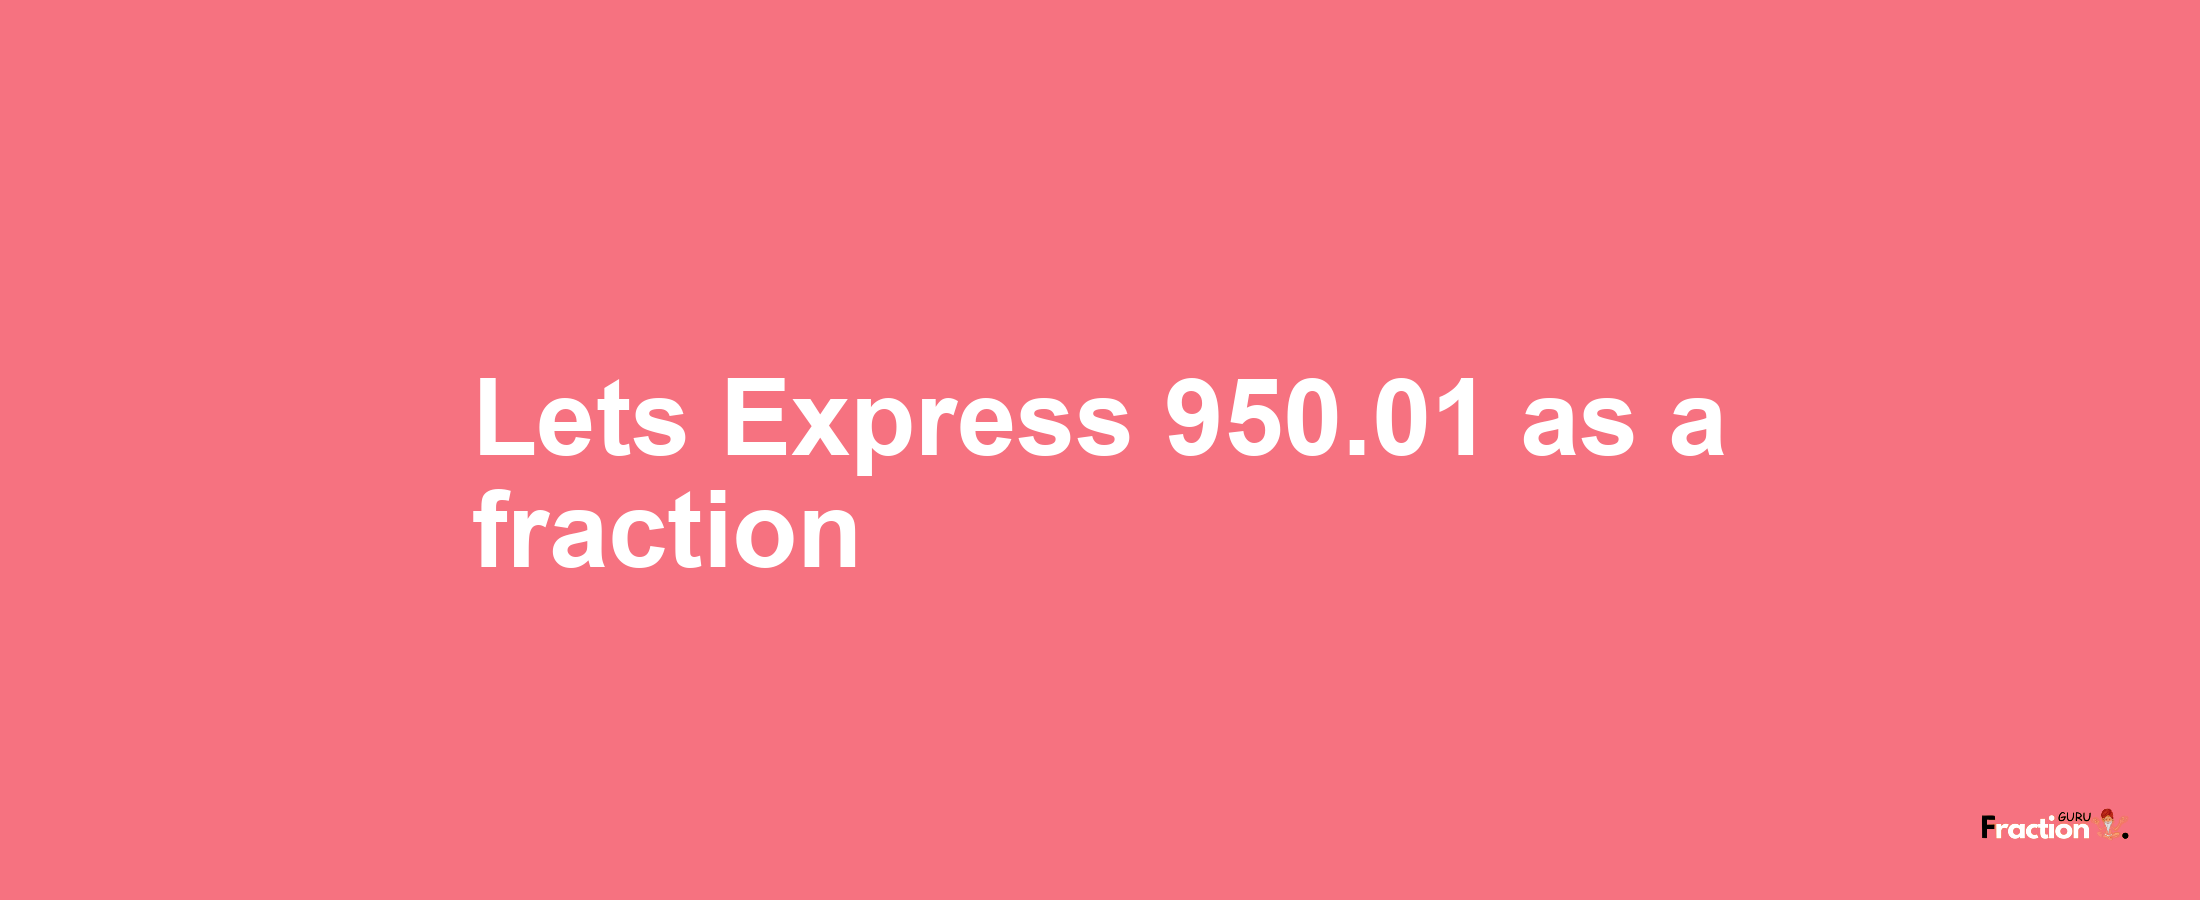 Lets Express 950.01 as afraction